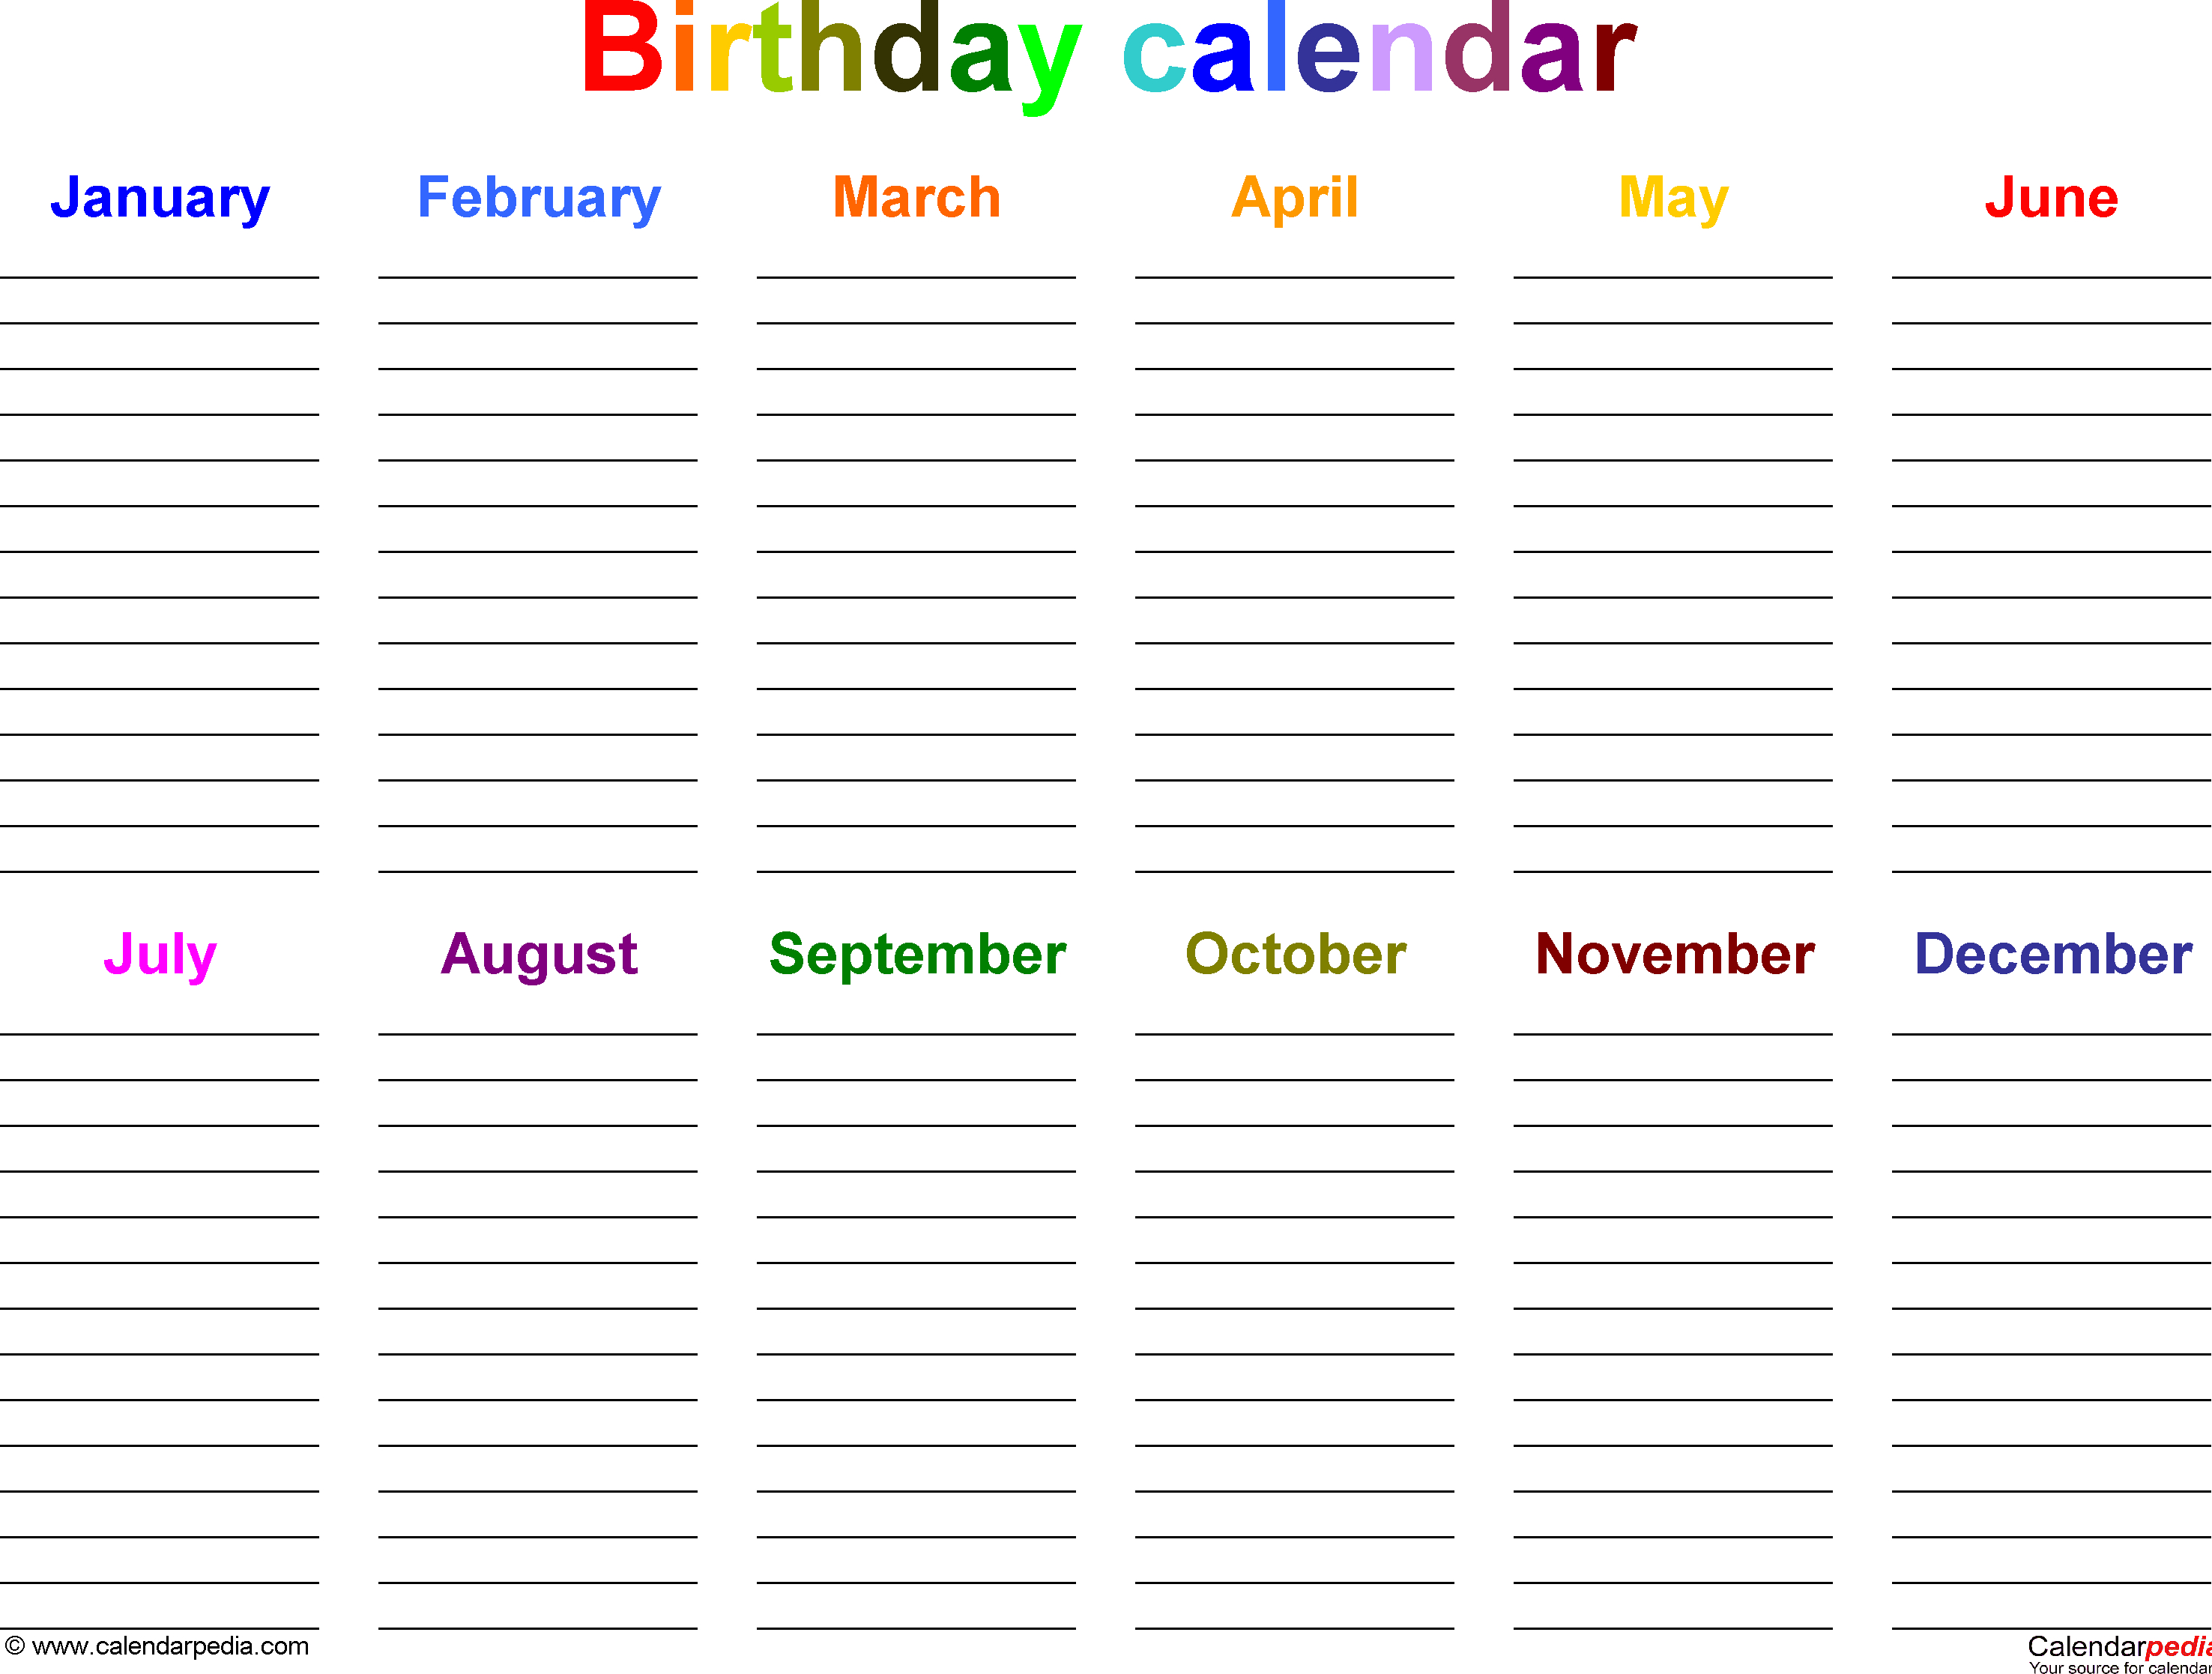 Excel Template For Birthday Calendar In Color (Landscape within Monthly Birthday Calendar Template